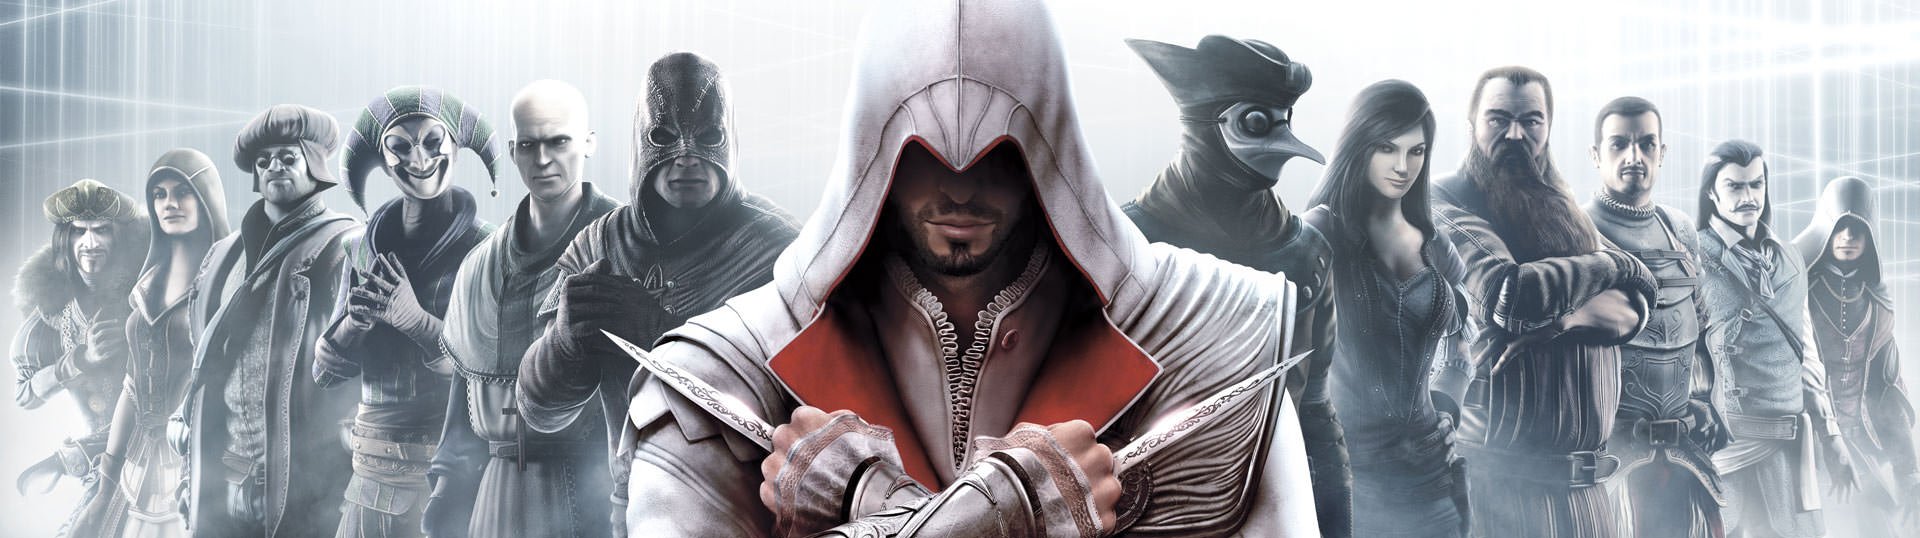 Buy Assassin's Creed II Deluxe Edition Steam Gift GLOBAL - Cheap - !